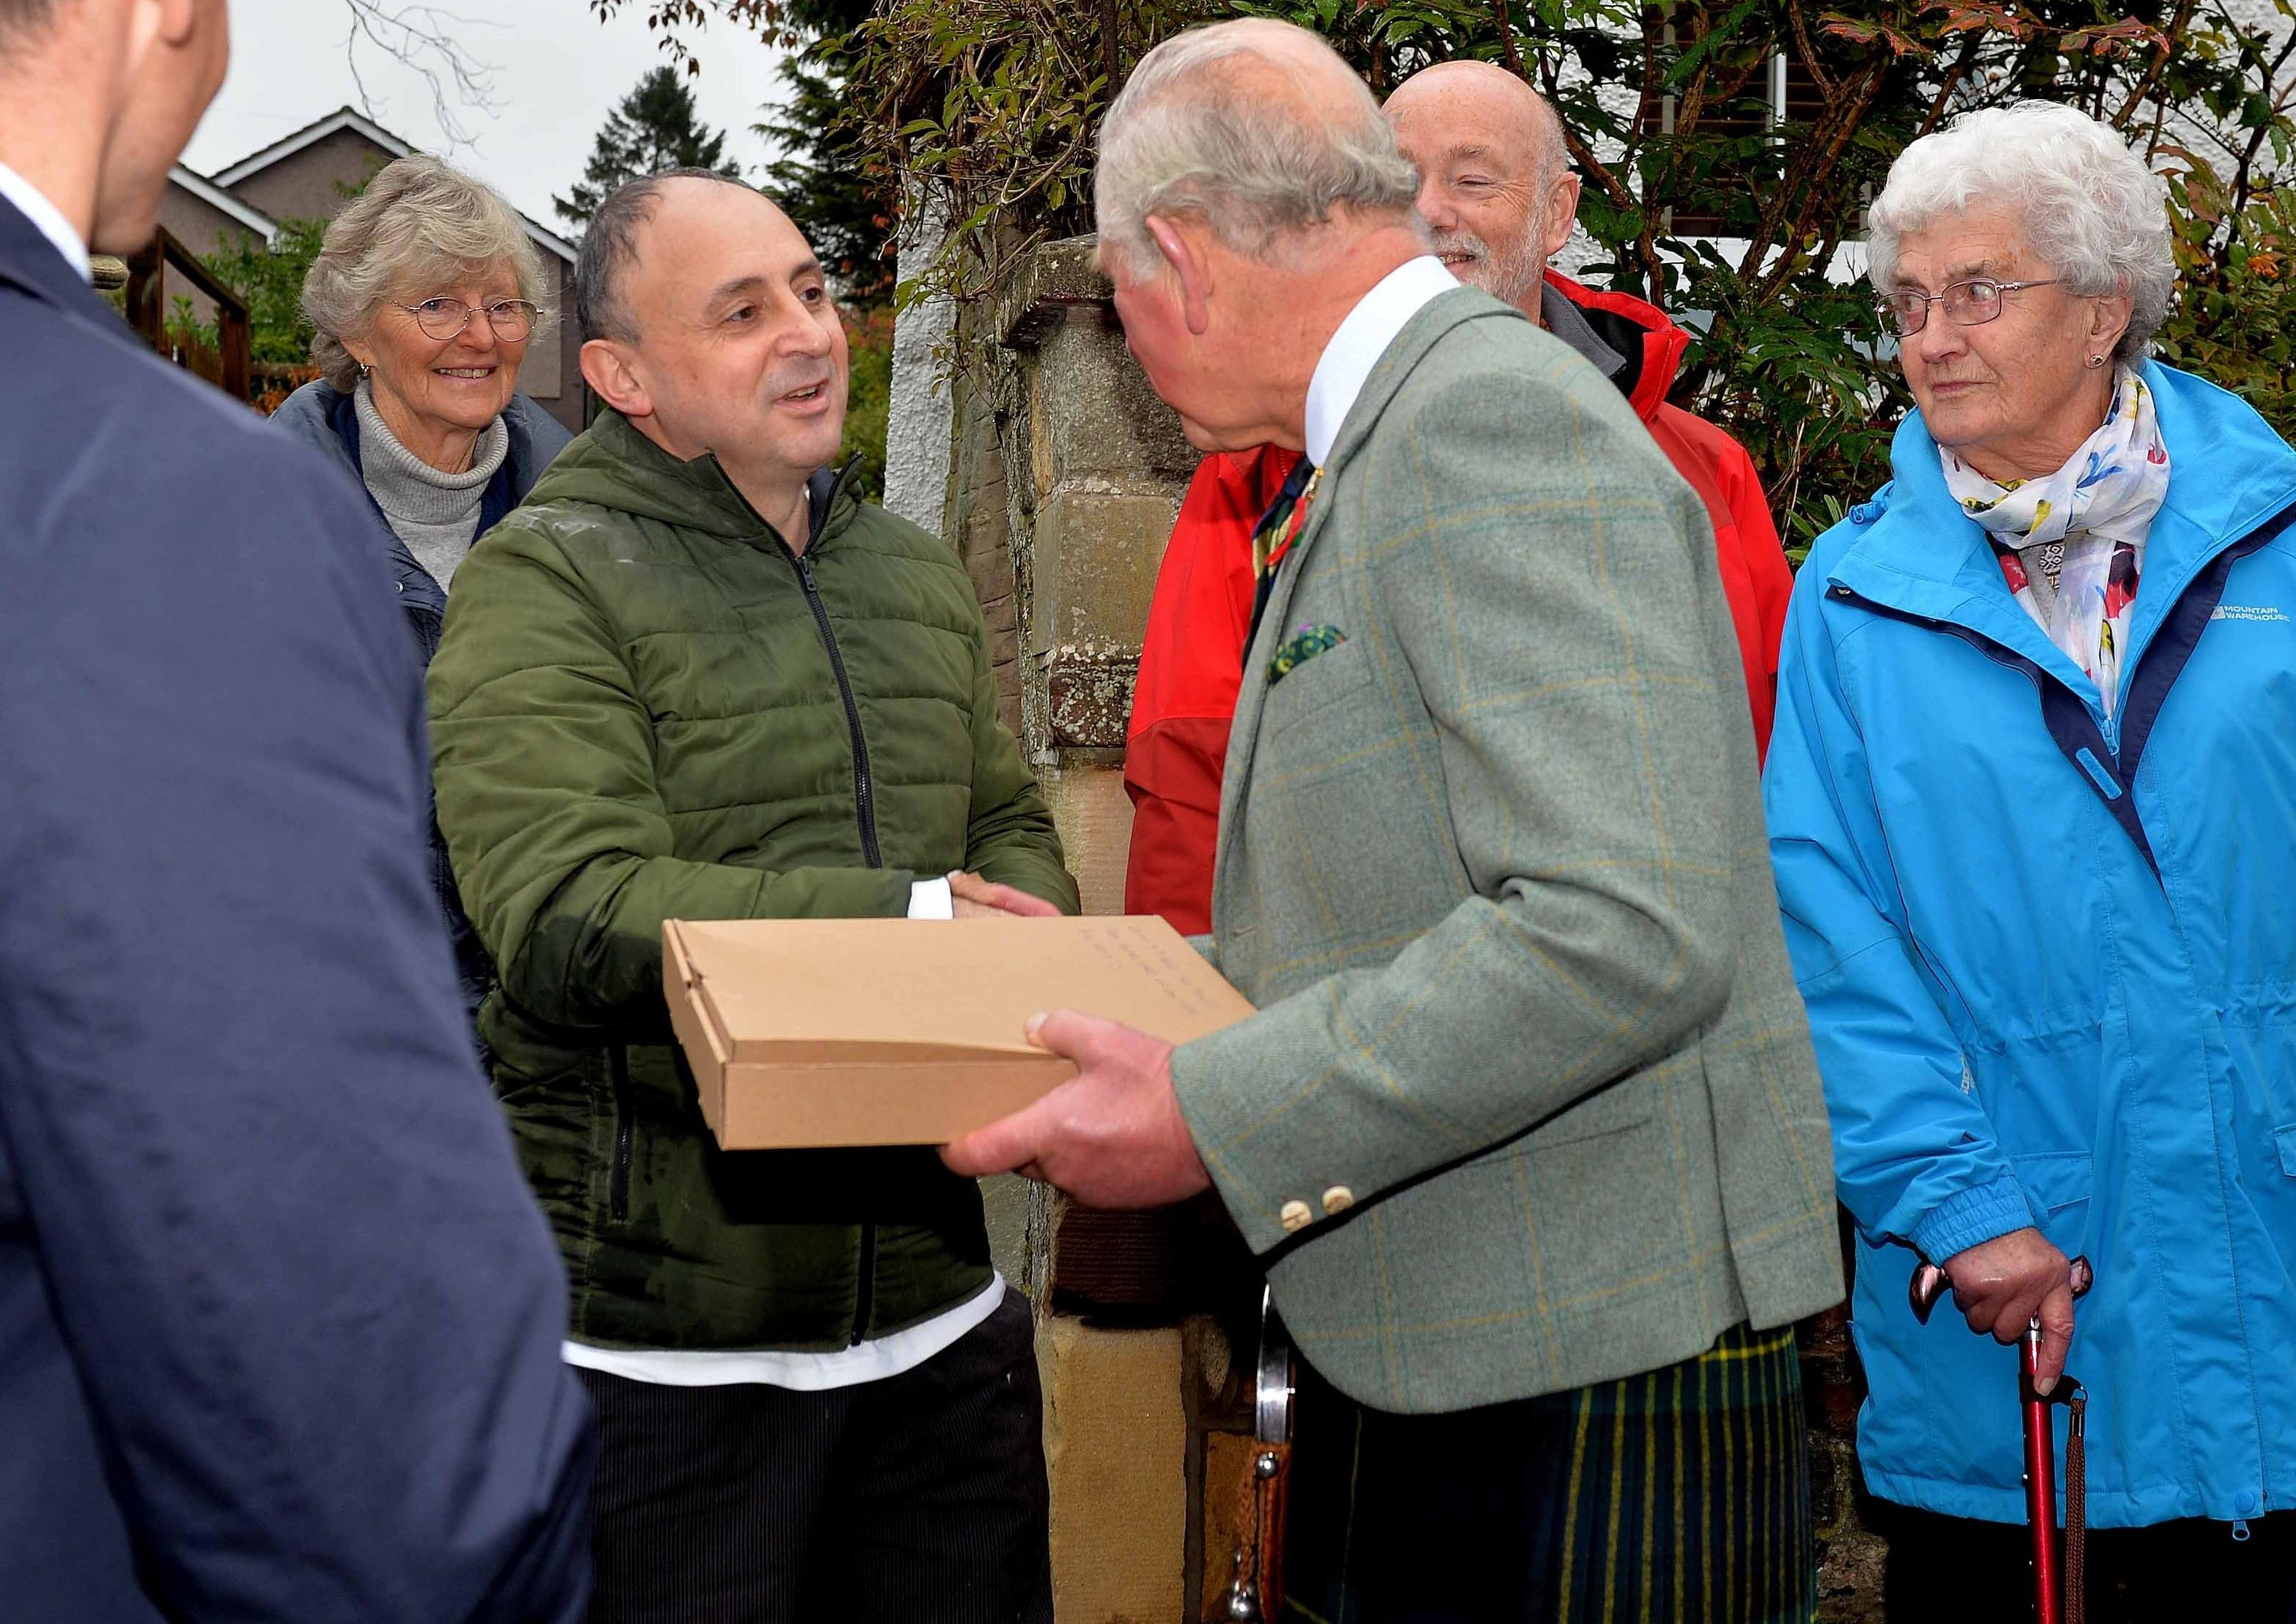 Di Meo Erminio from Hunter's Stables presents the Duke of Rothesay with his homemade Margherita pizza.